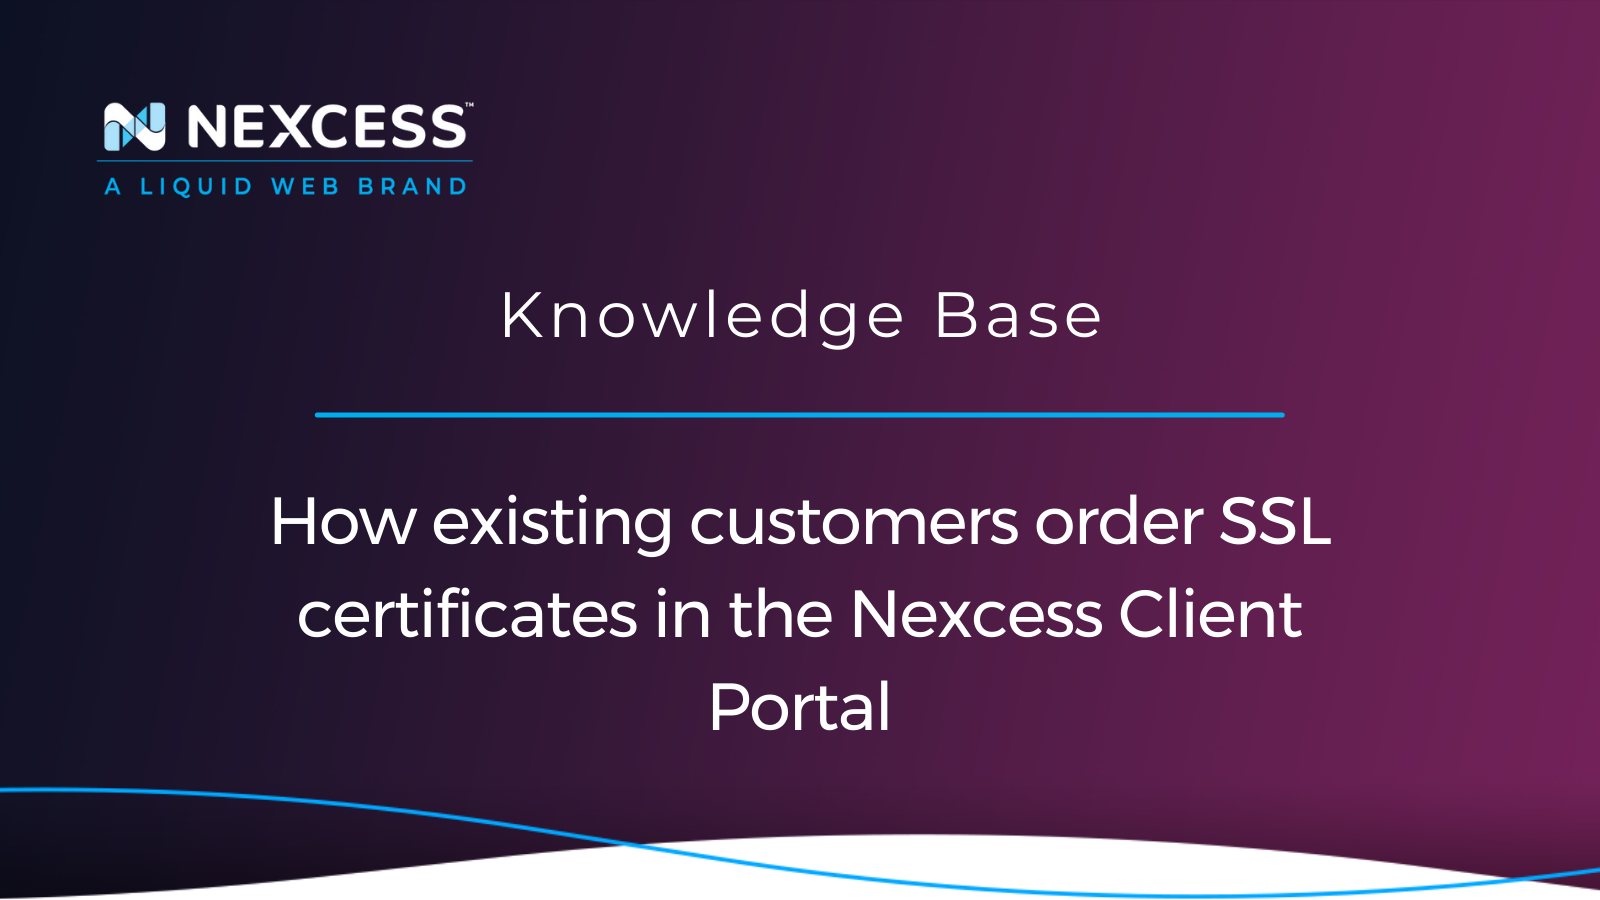 How existing customers order SSL certificates in the Nexcess Client Portal